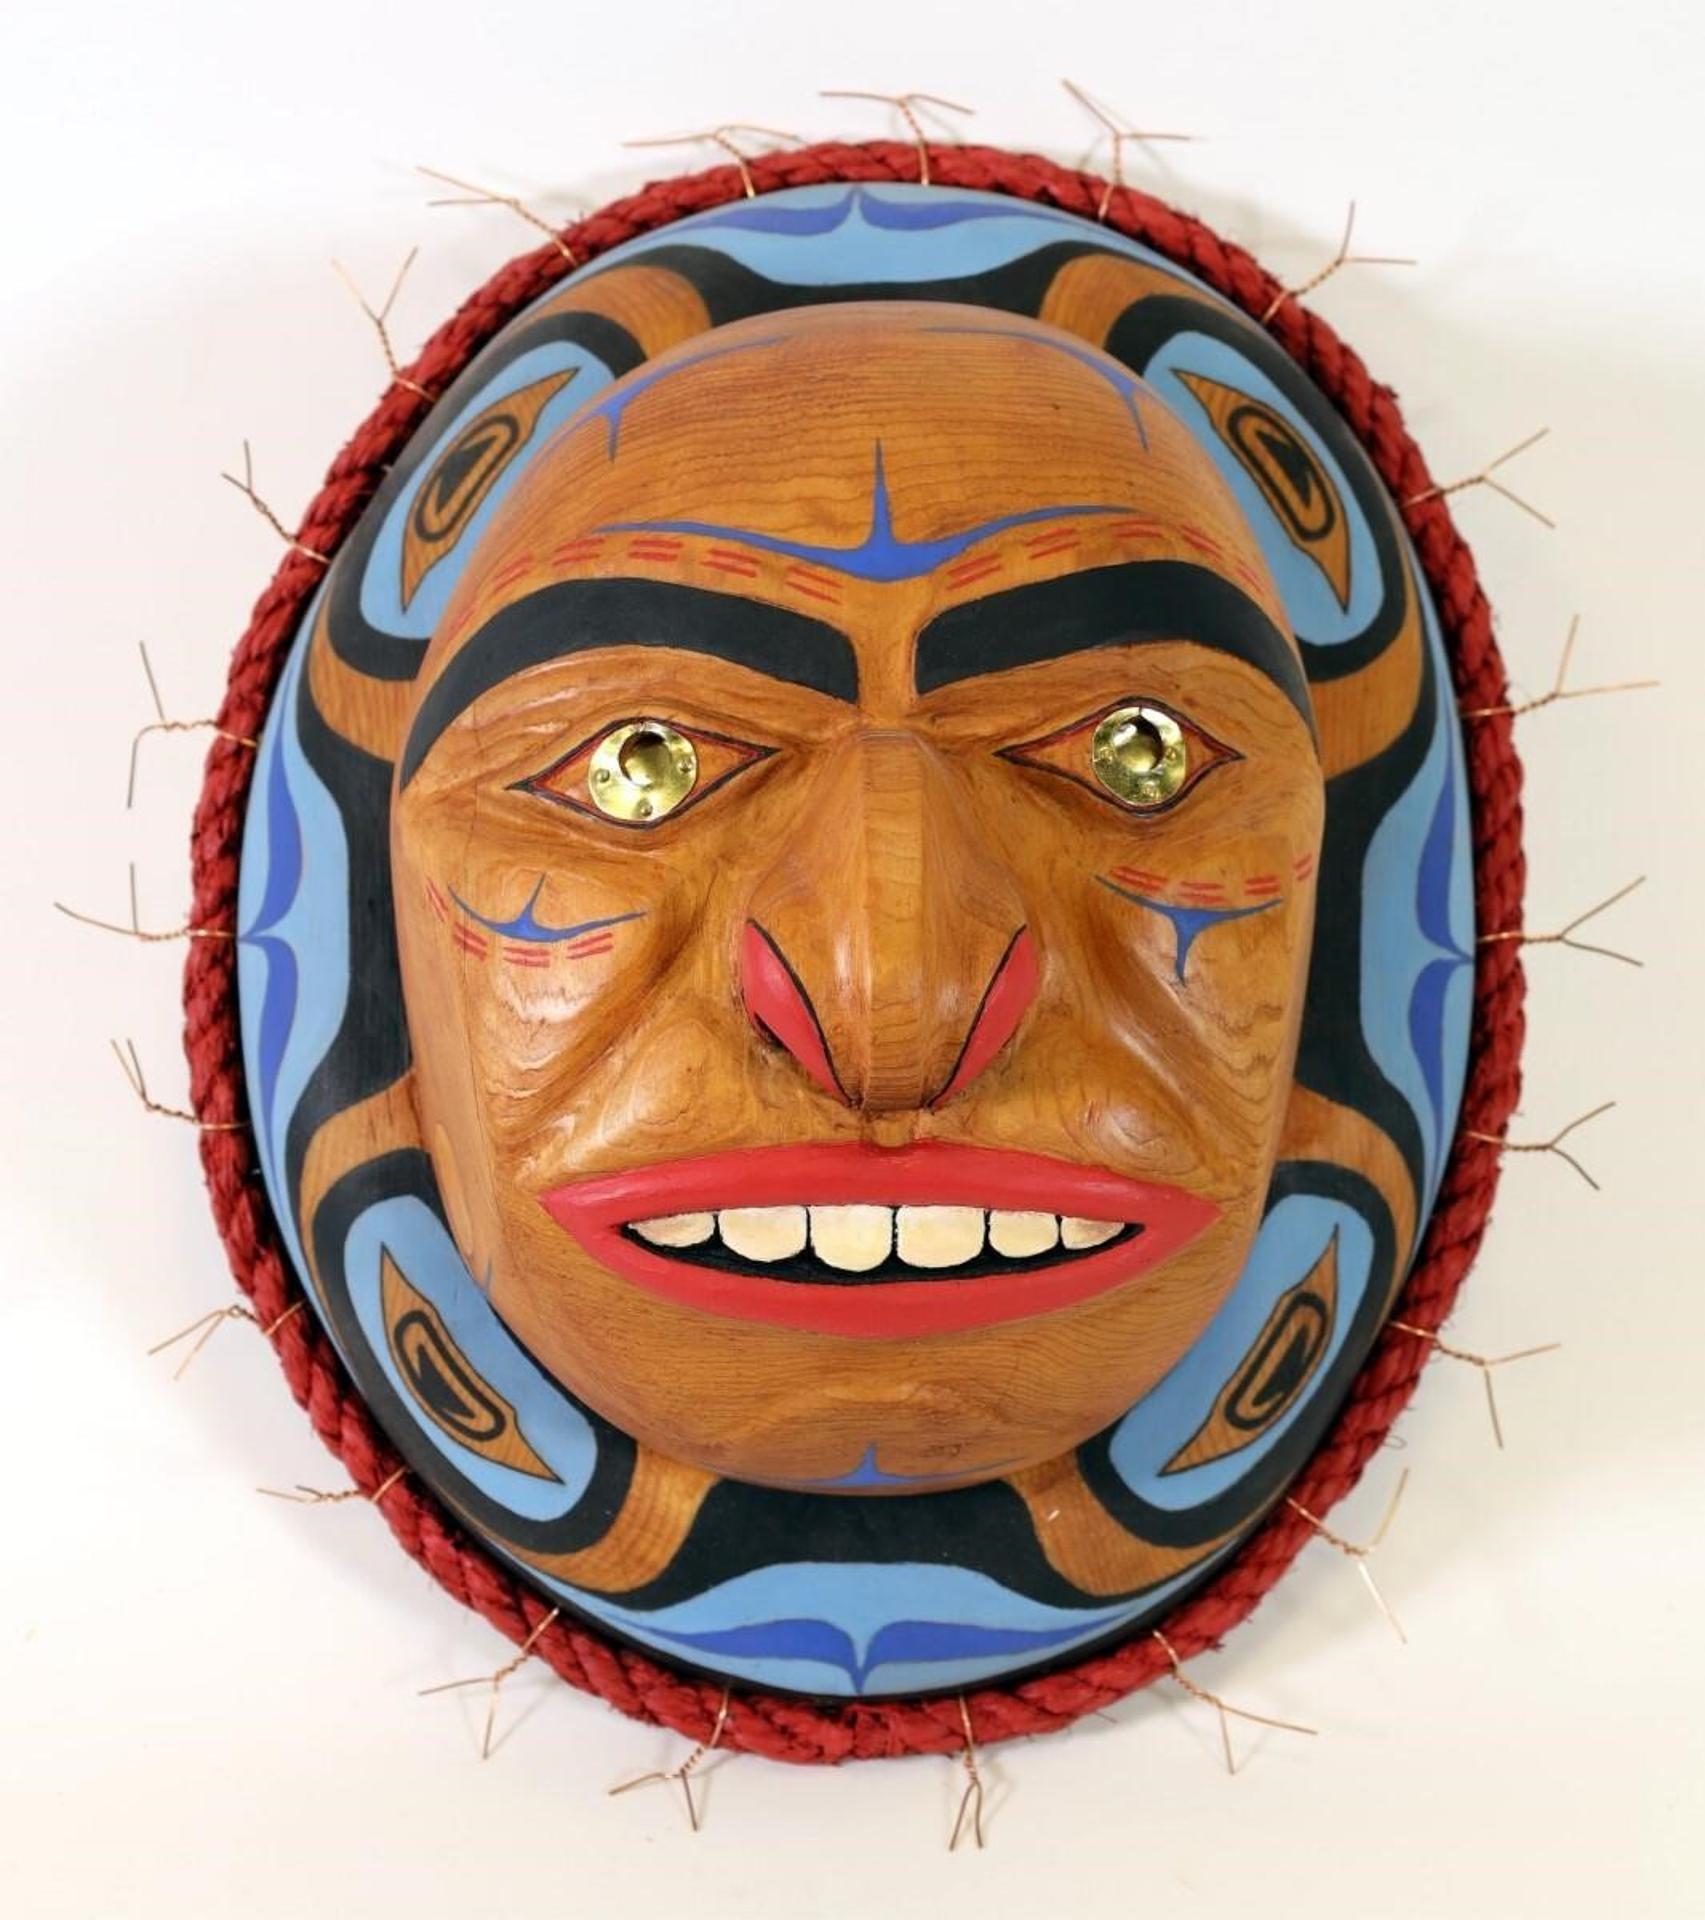 Polychrome Cedar Carved Mask - a polychrome carved cedar and mixed media mask (relief carving), depicting a Face